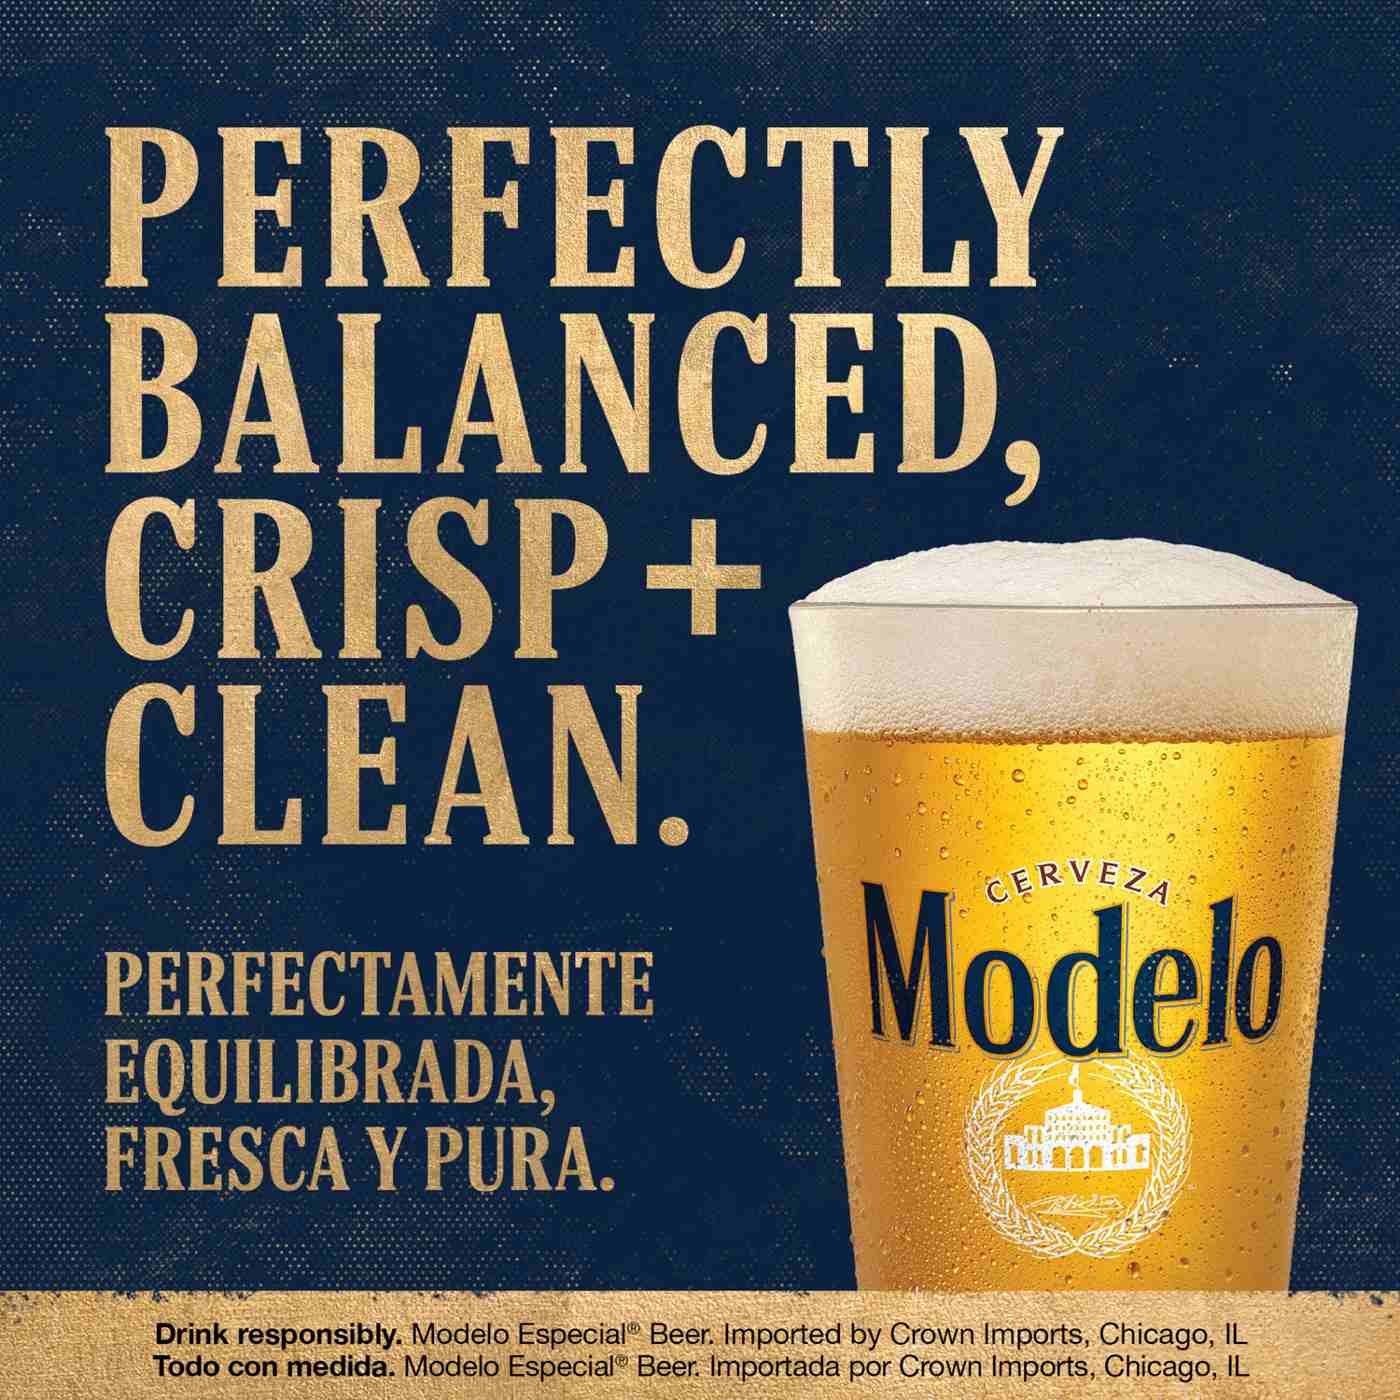 Modelo Especial Mexican Lager Import Beer 12 oz Bottles, 12 pk; image 9 of 10